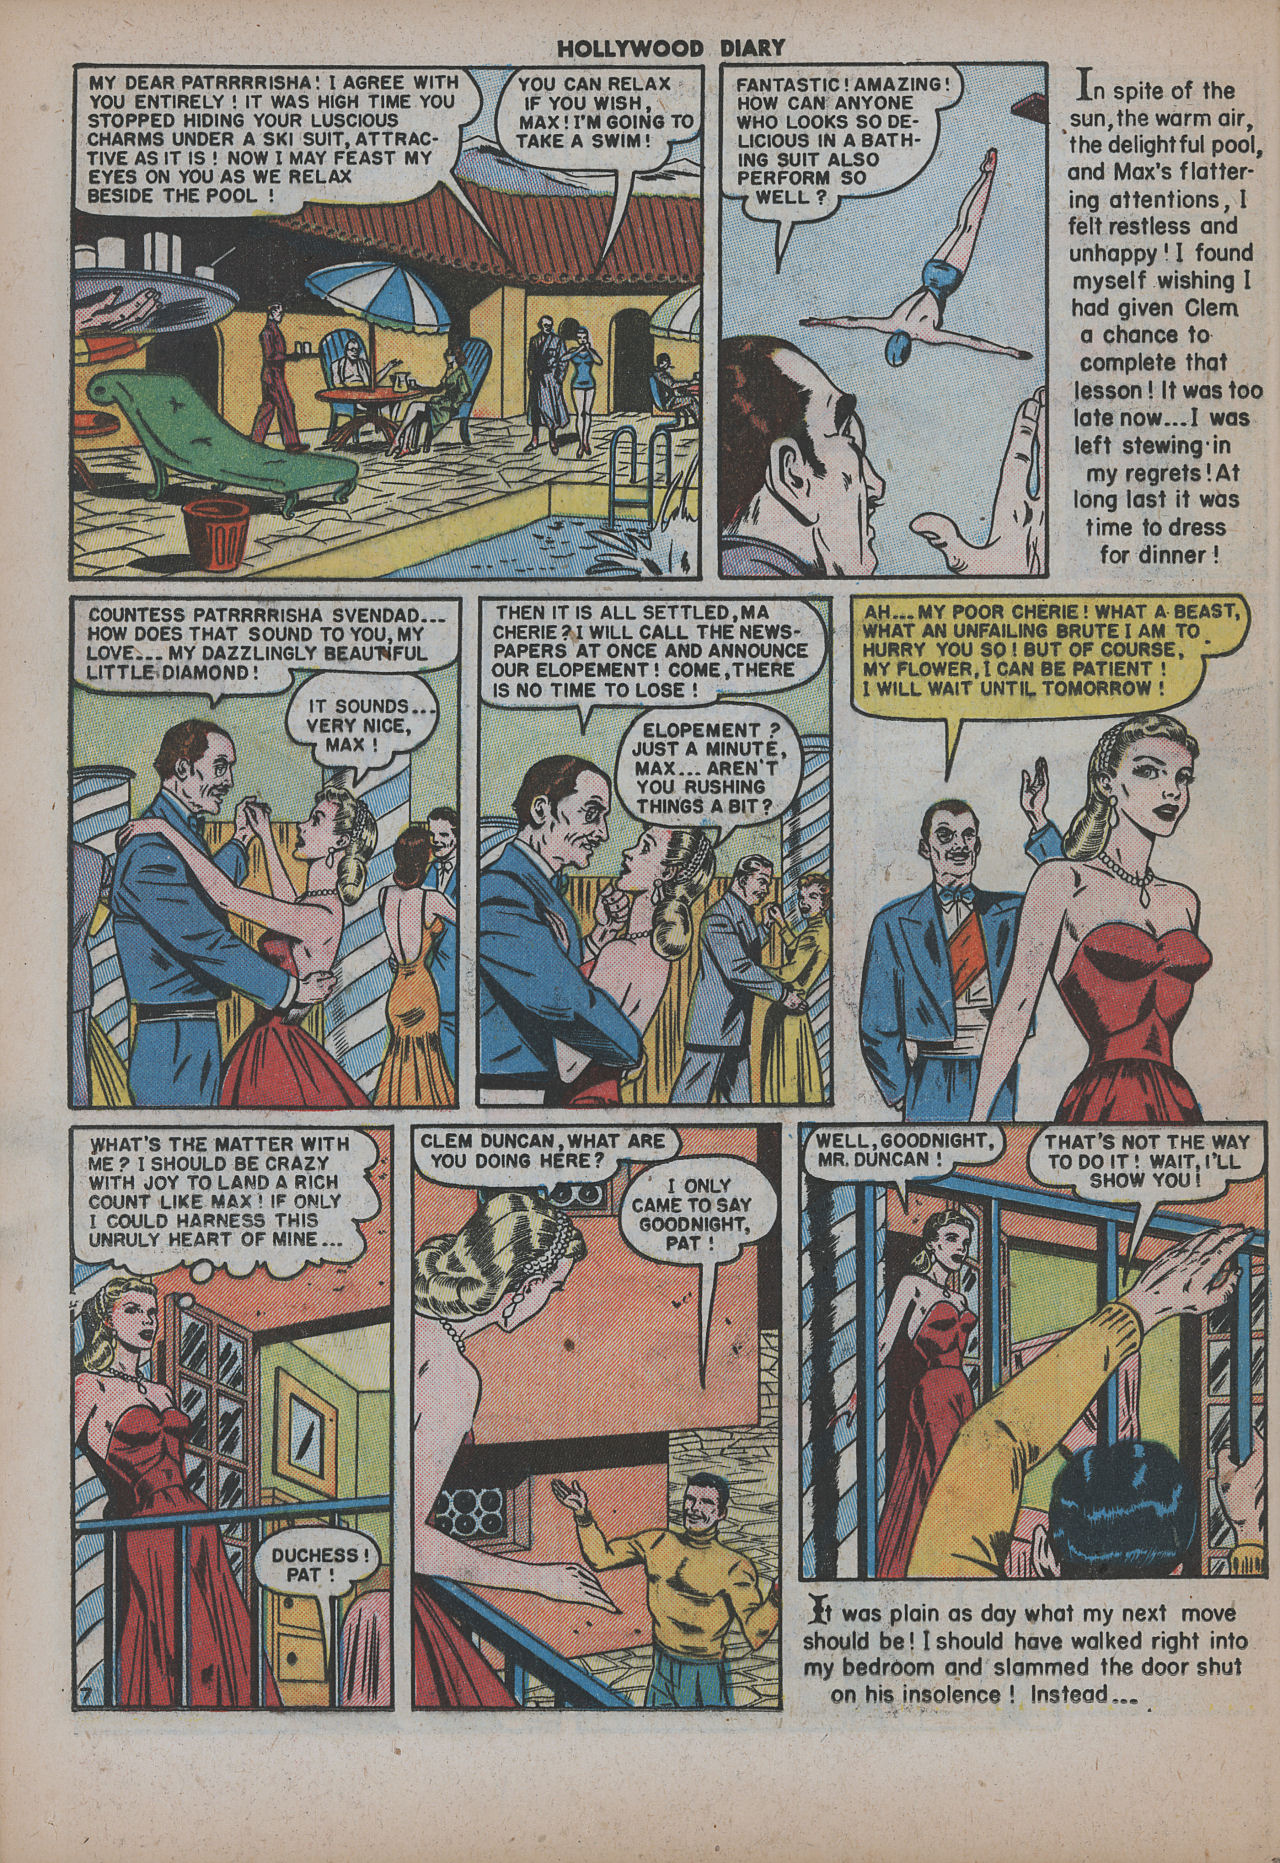 Read online Hollywood Diary comic -  Issue #4 - 24